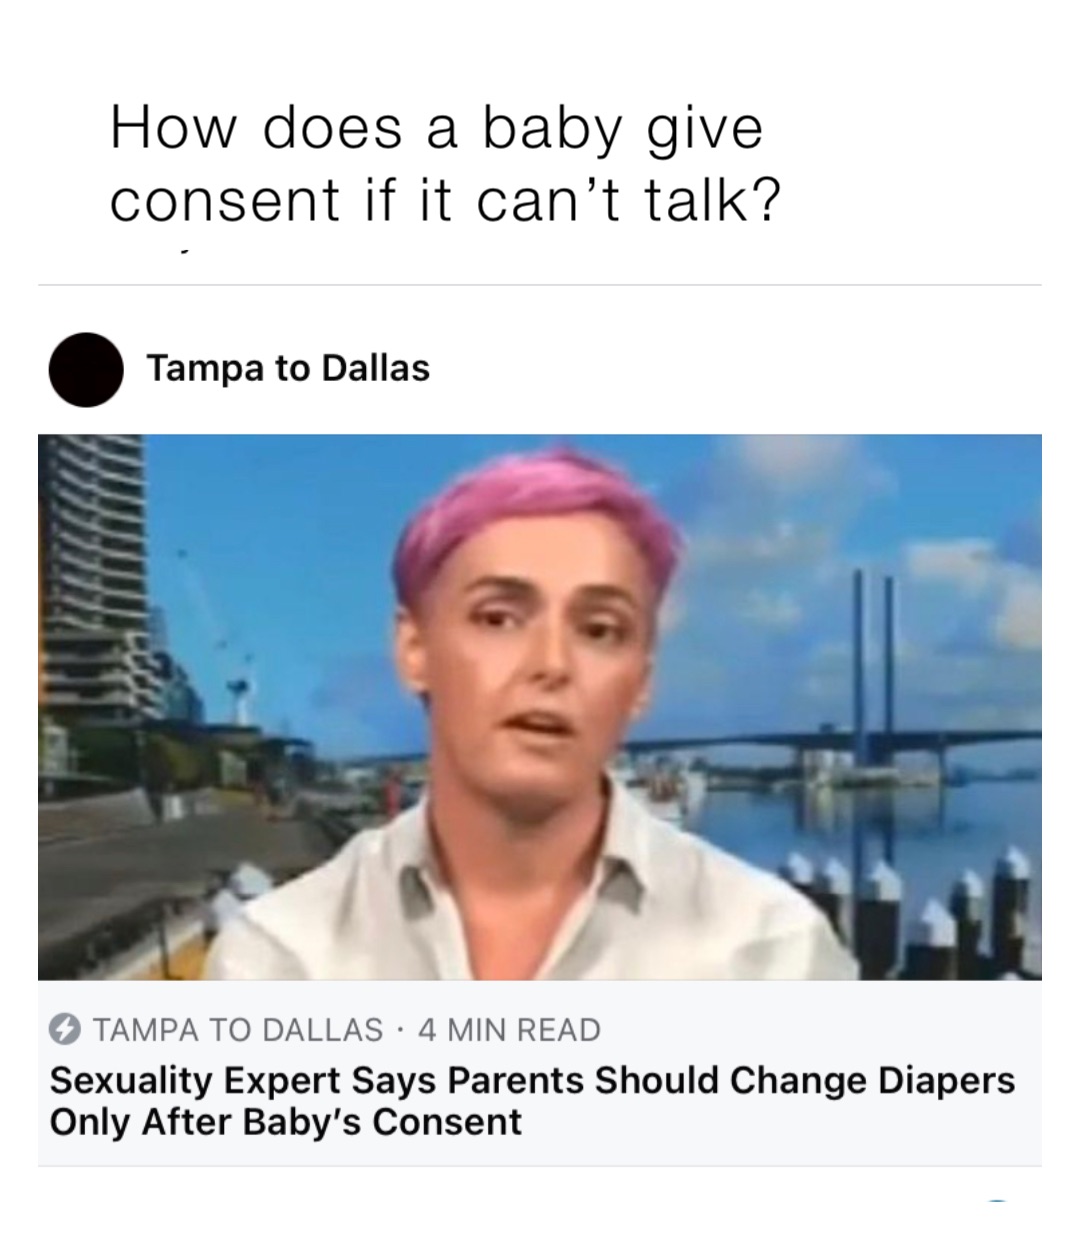 How does a baby give consent if it can’t talk?